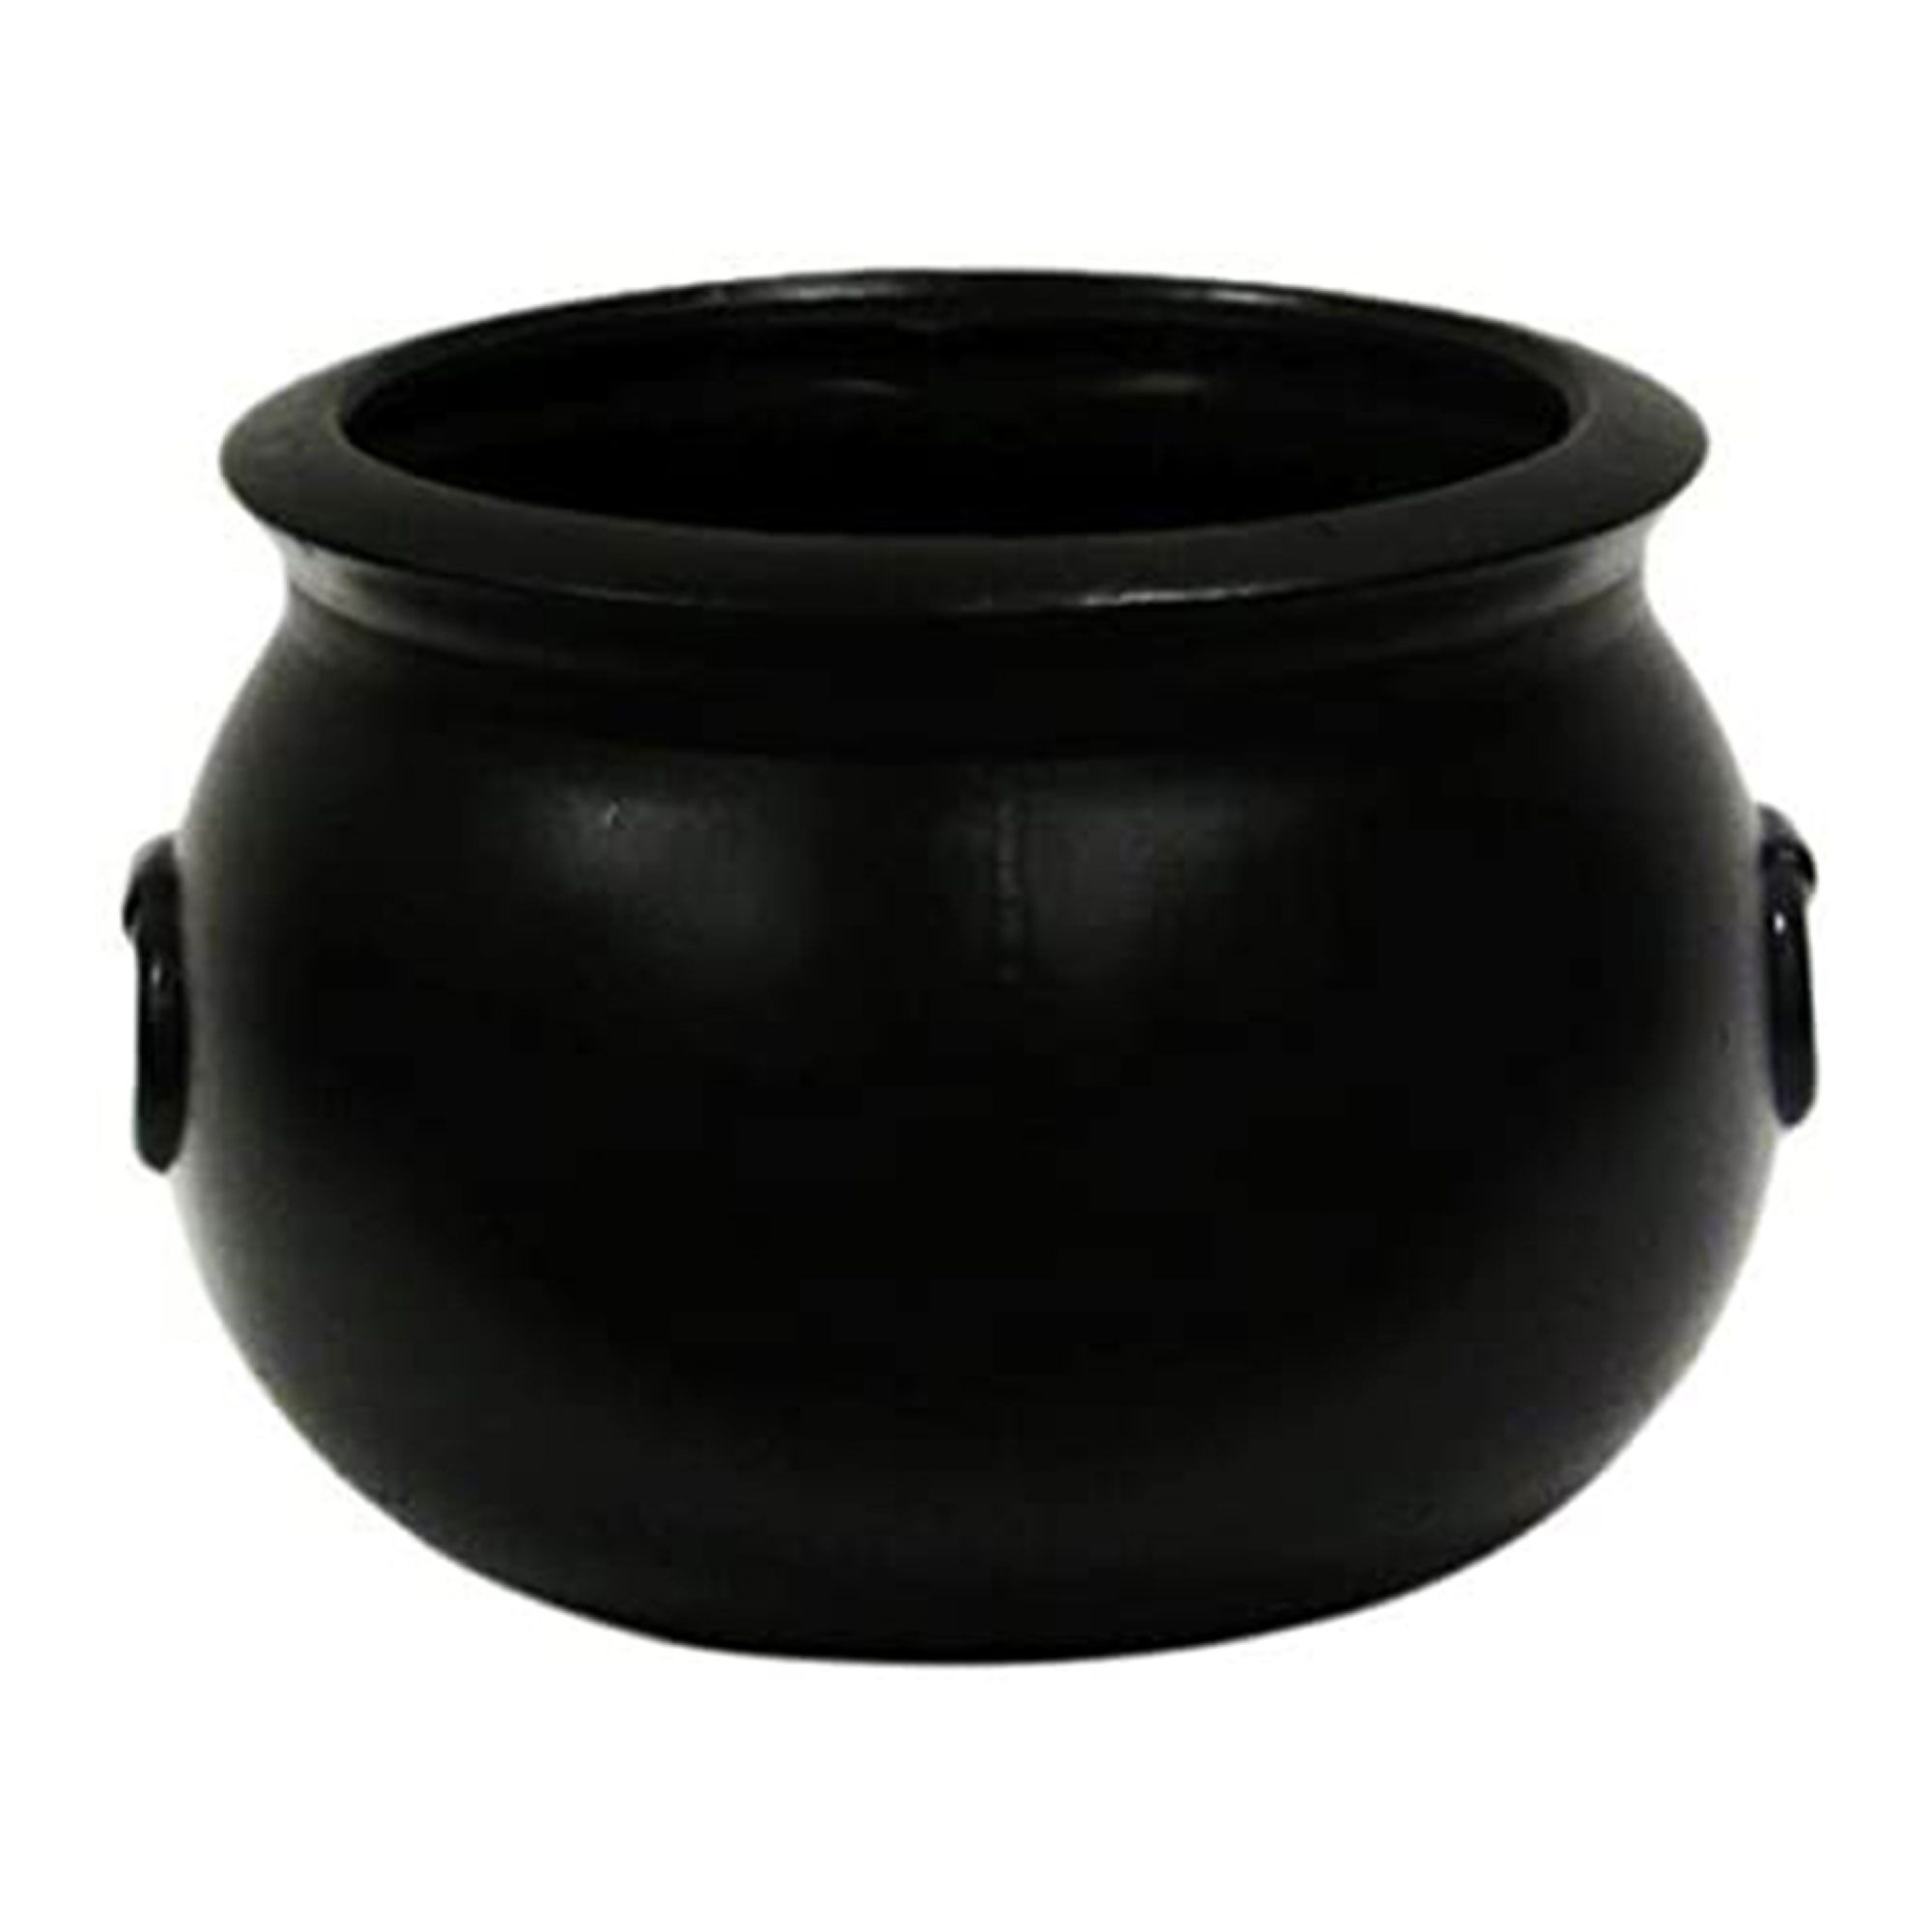 Union Products 16 inch x 12 inch Witch Cauldron Halloween Decoration, Black - image 2 of 6